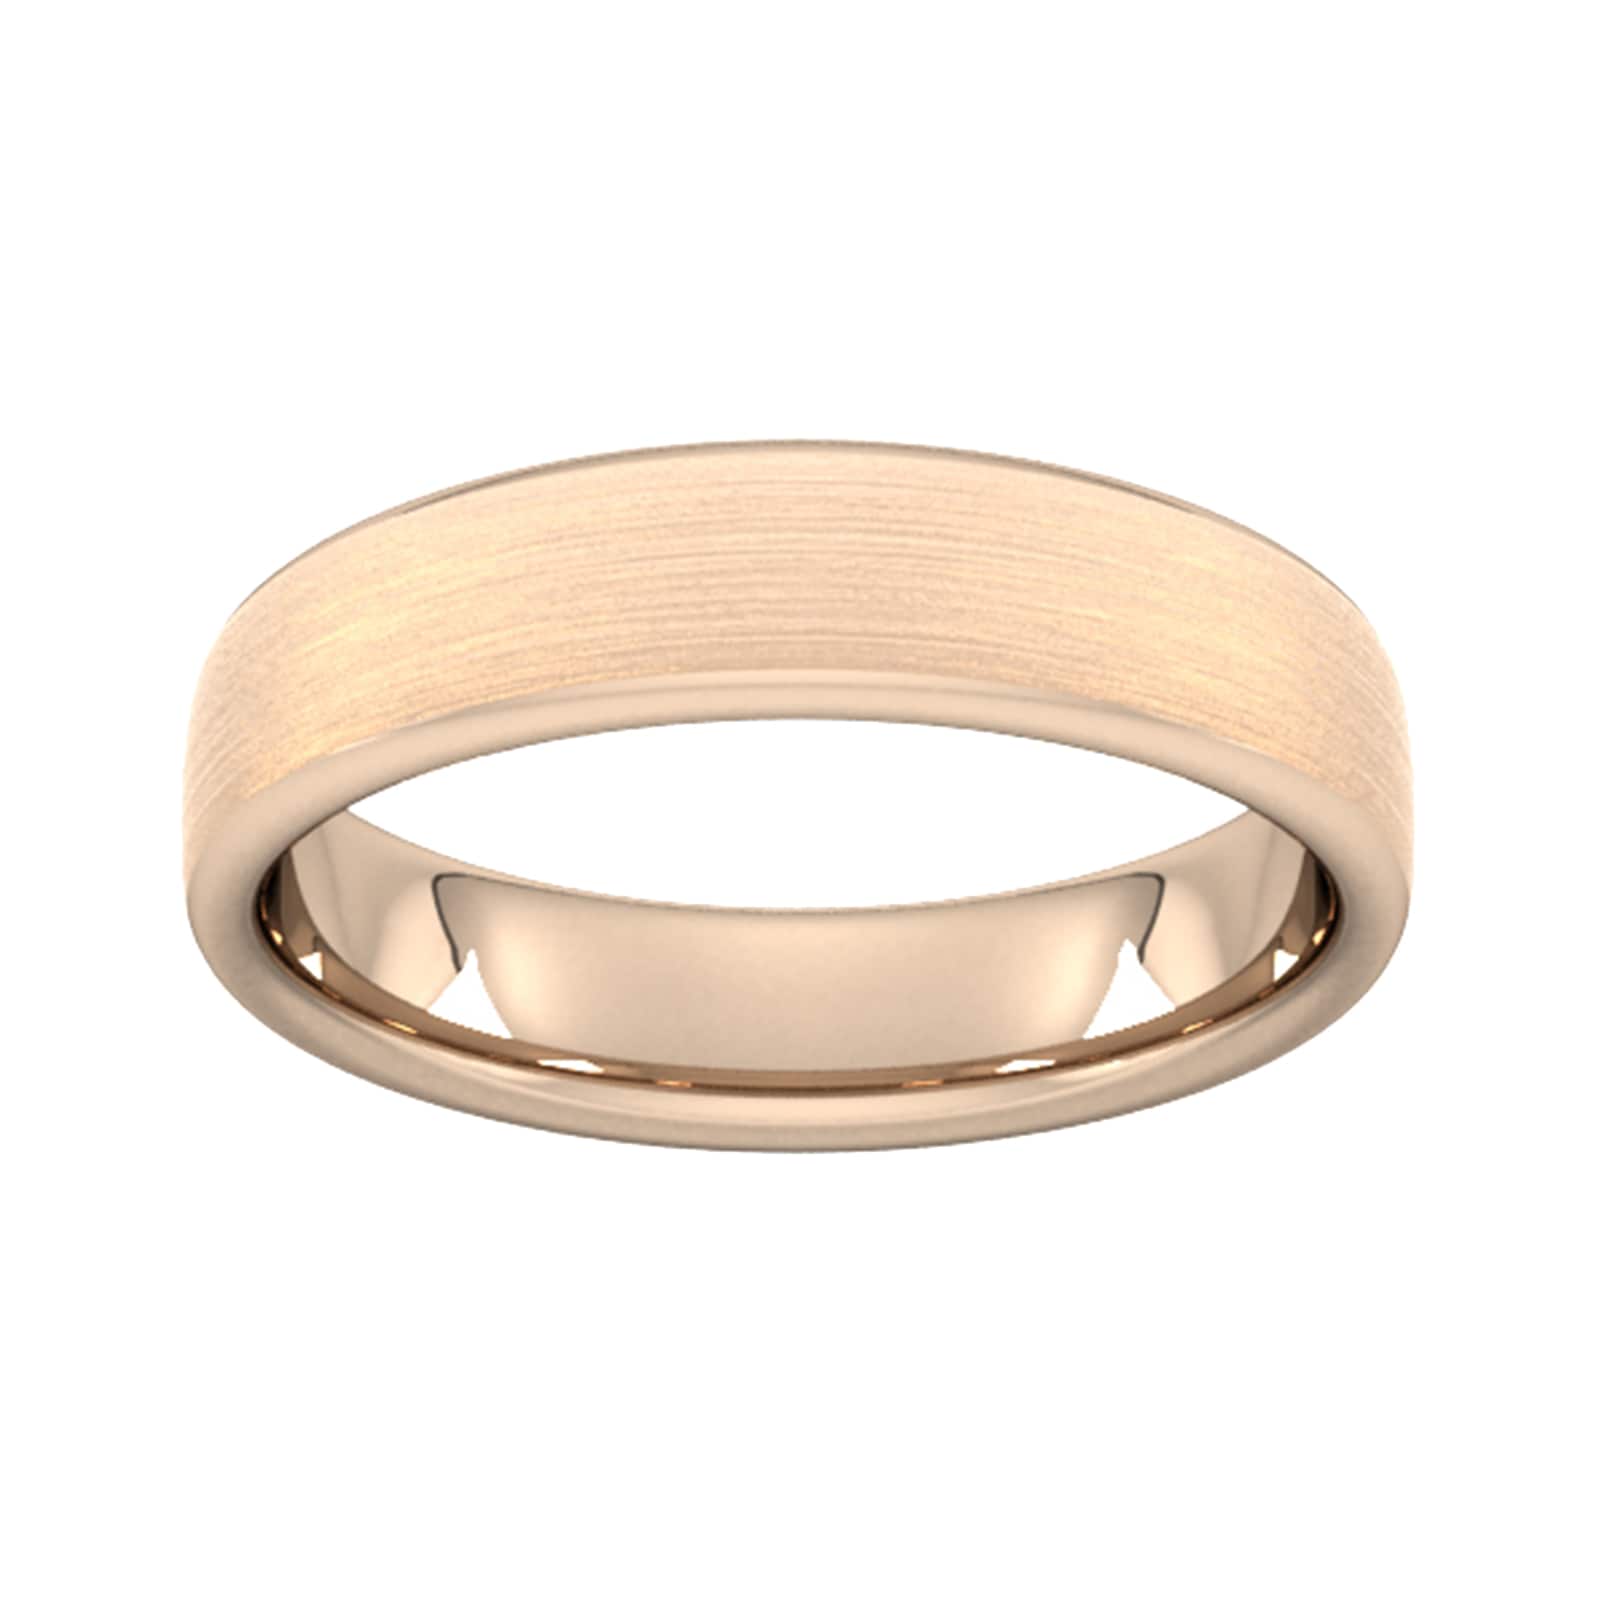 5mm Flat Court Heavy Matt Finished Wedding Ring In 18 Carat Rose Gold - Ring Size P